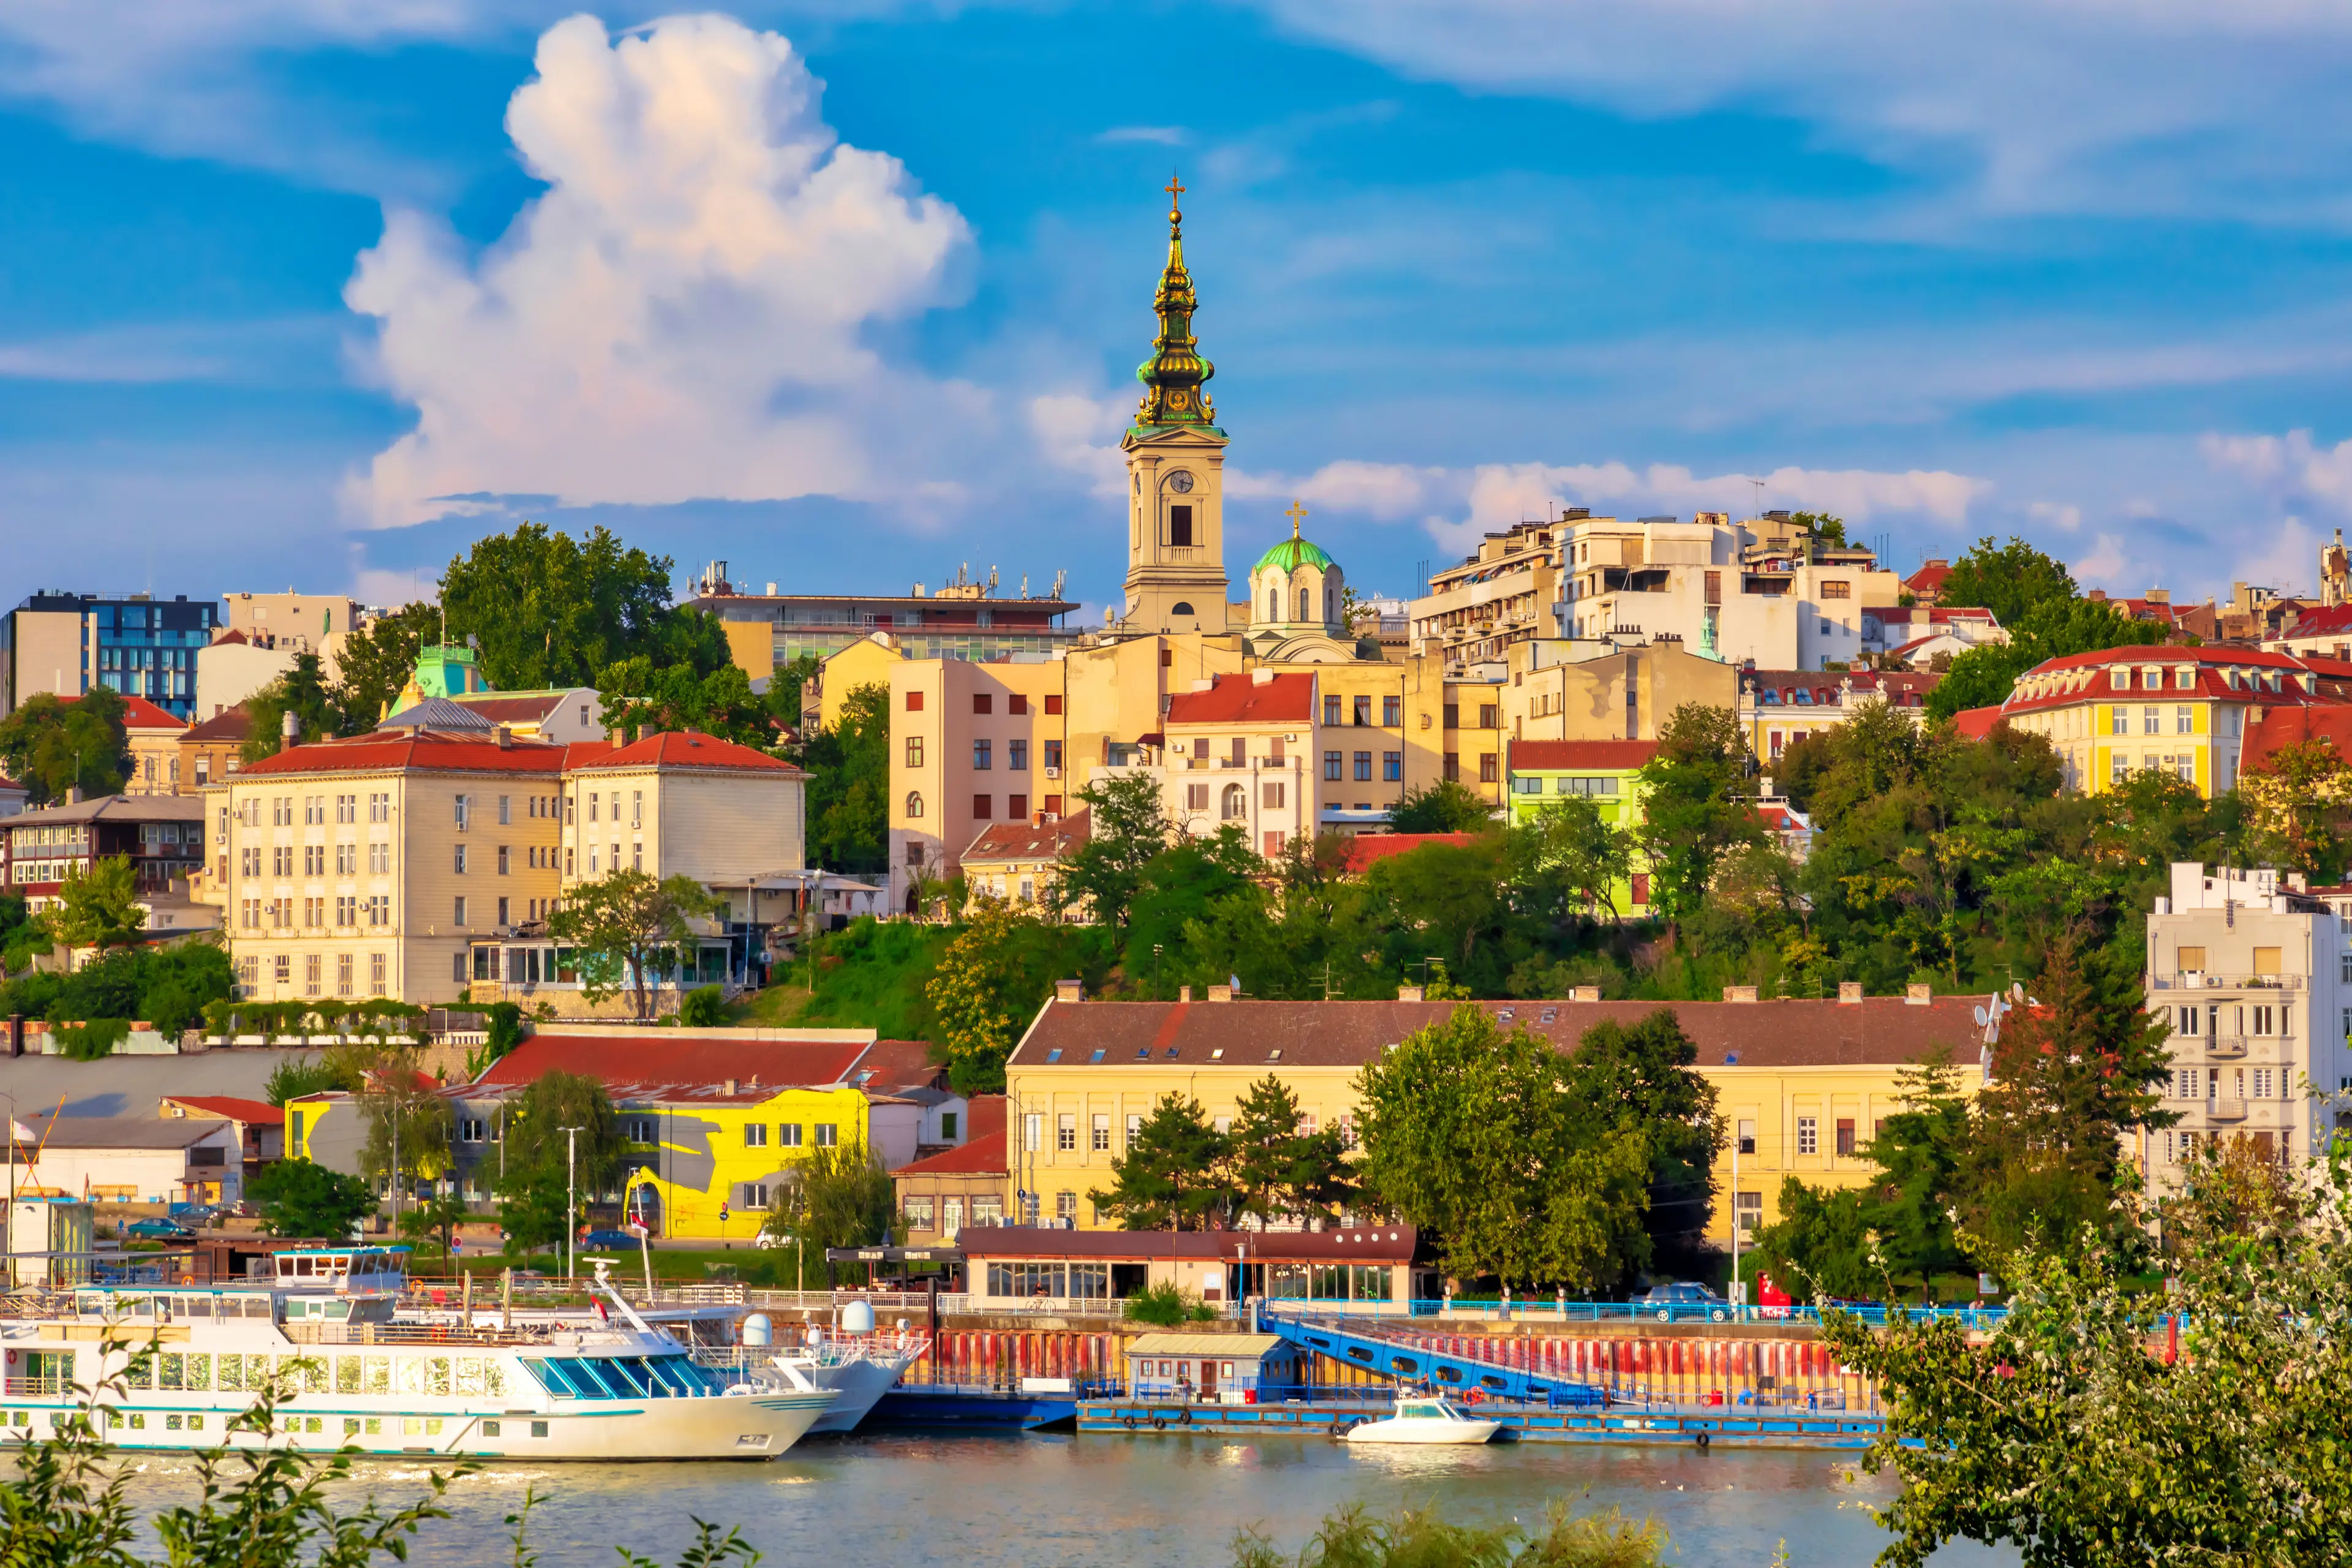 The old historic city center on Sava river banks